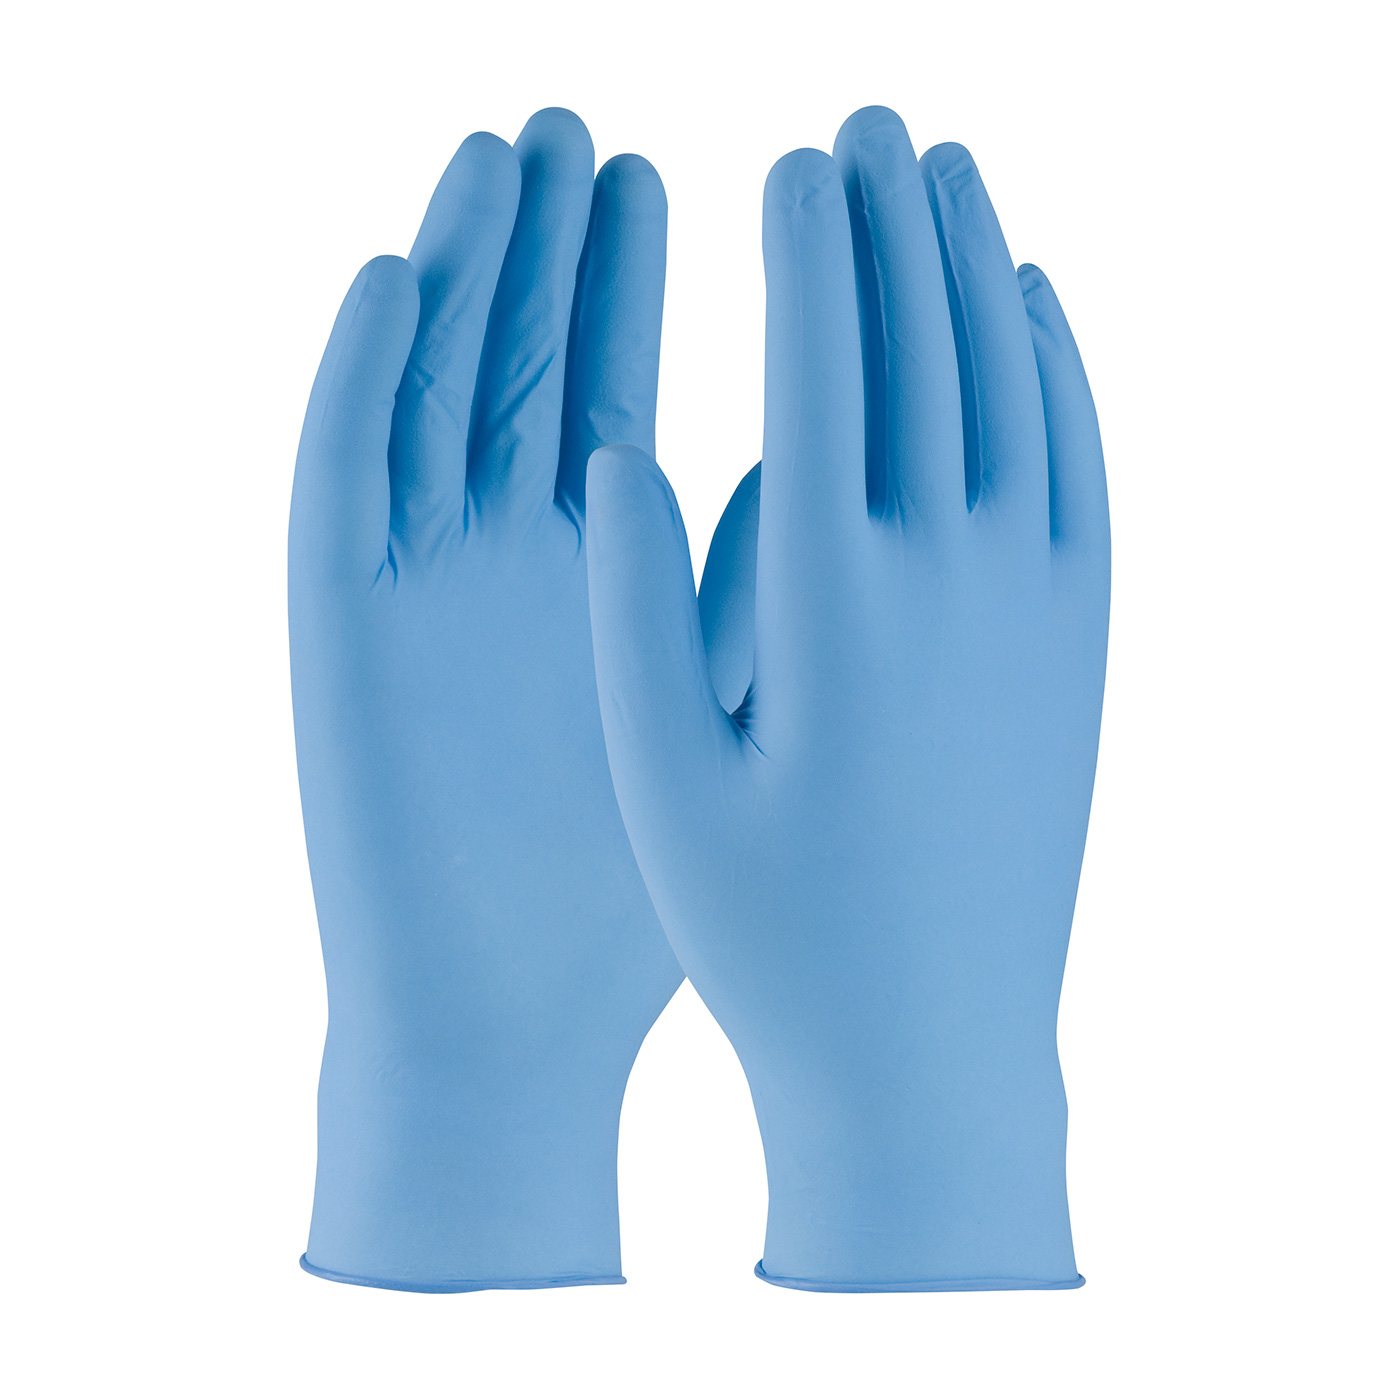 #63-332PF PIP Ambi-dex® Turbo Disposable Nitrile Glove, Powder Free with Textured Grip - 5 mil

